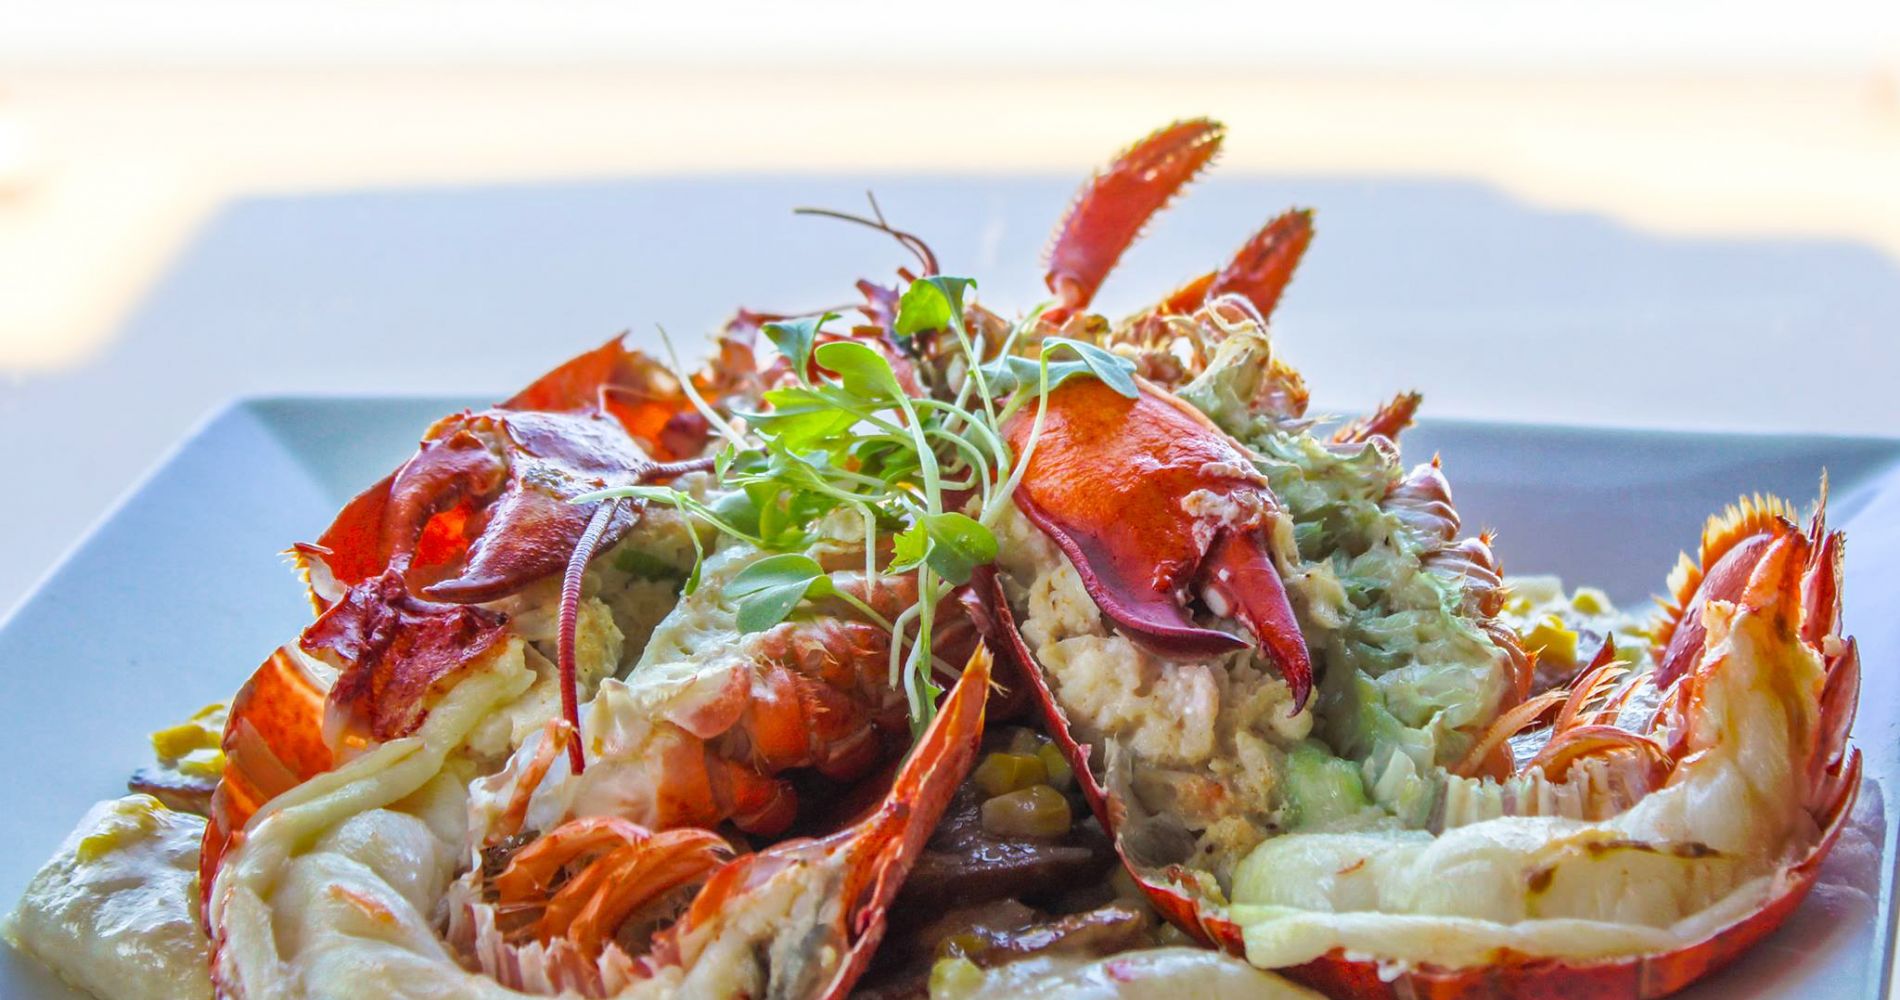 split lobster tails and claws on a plate